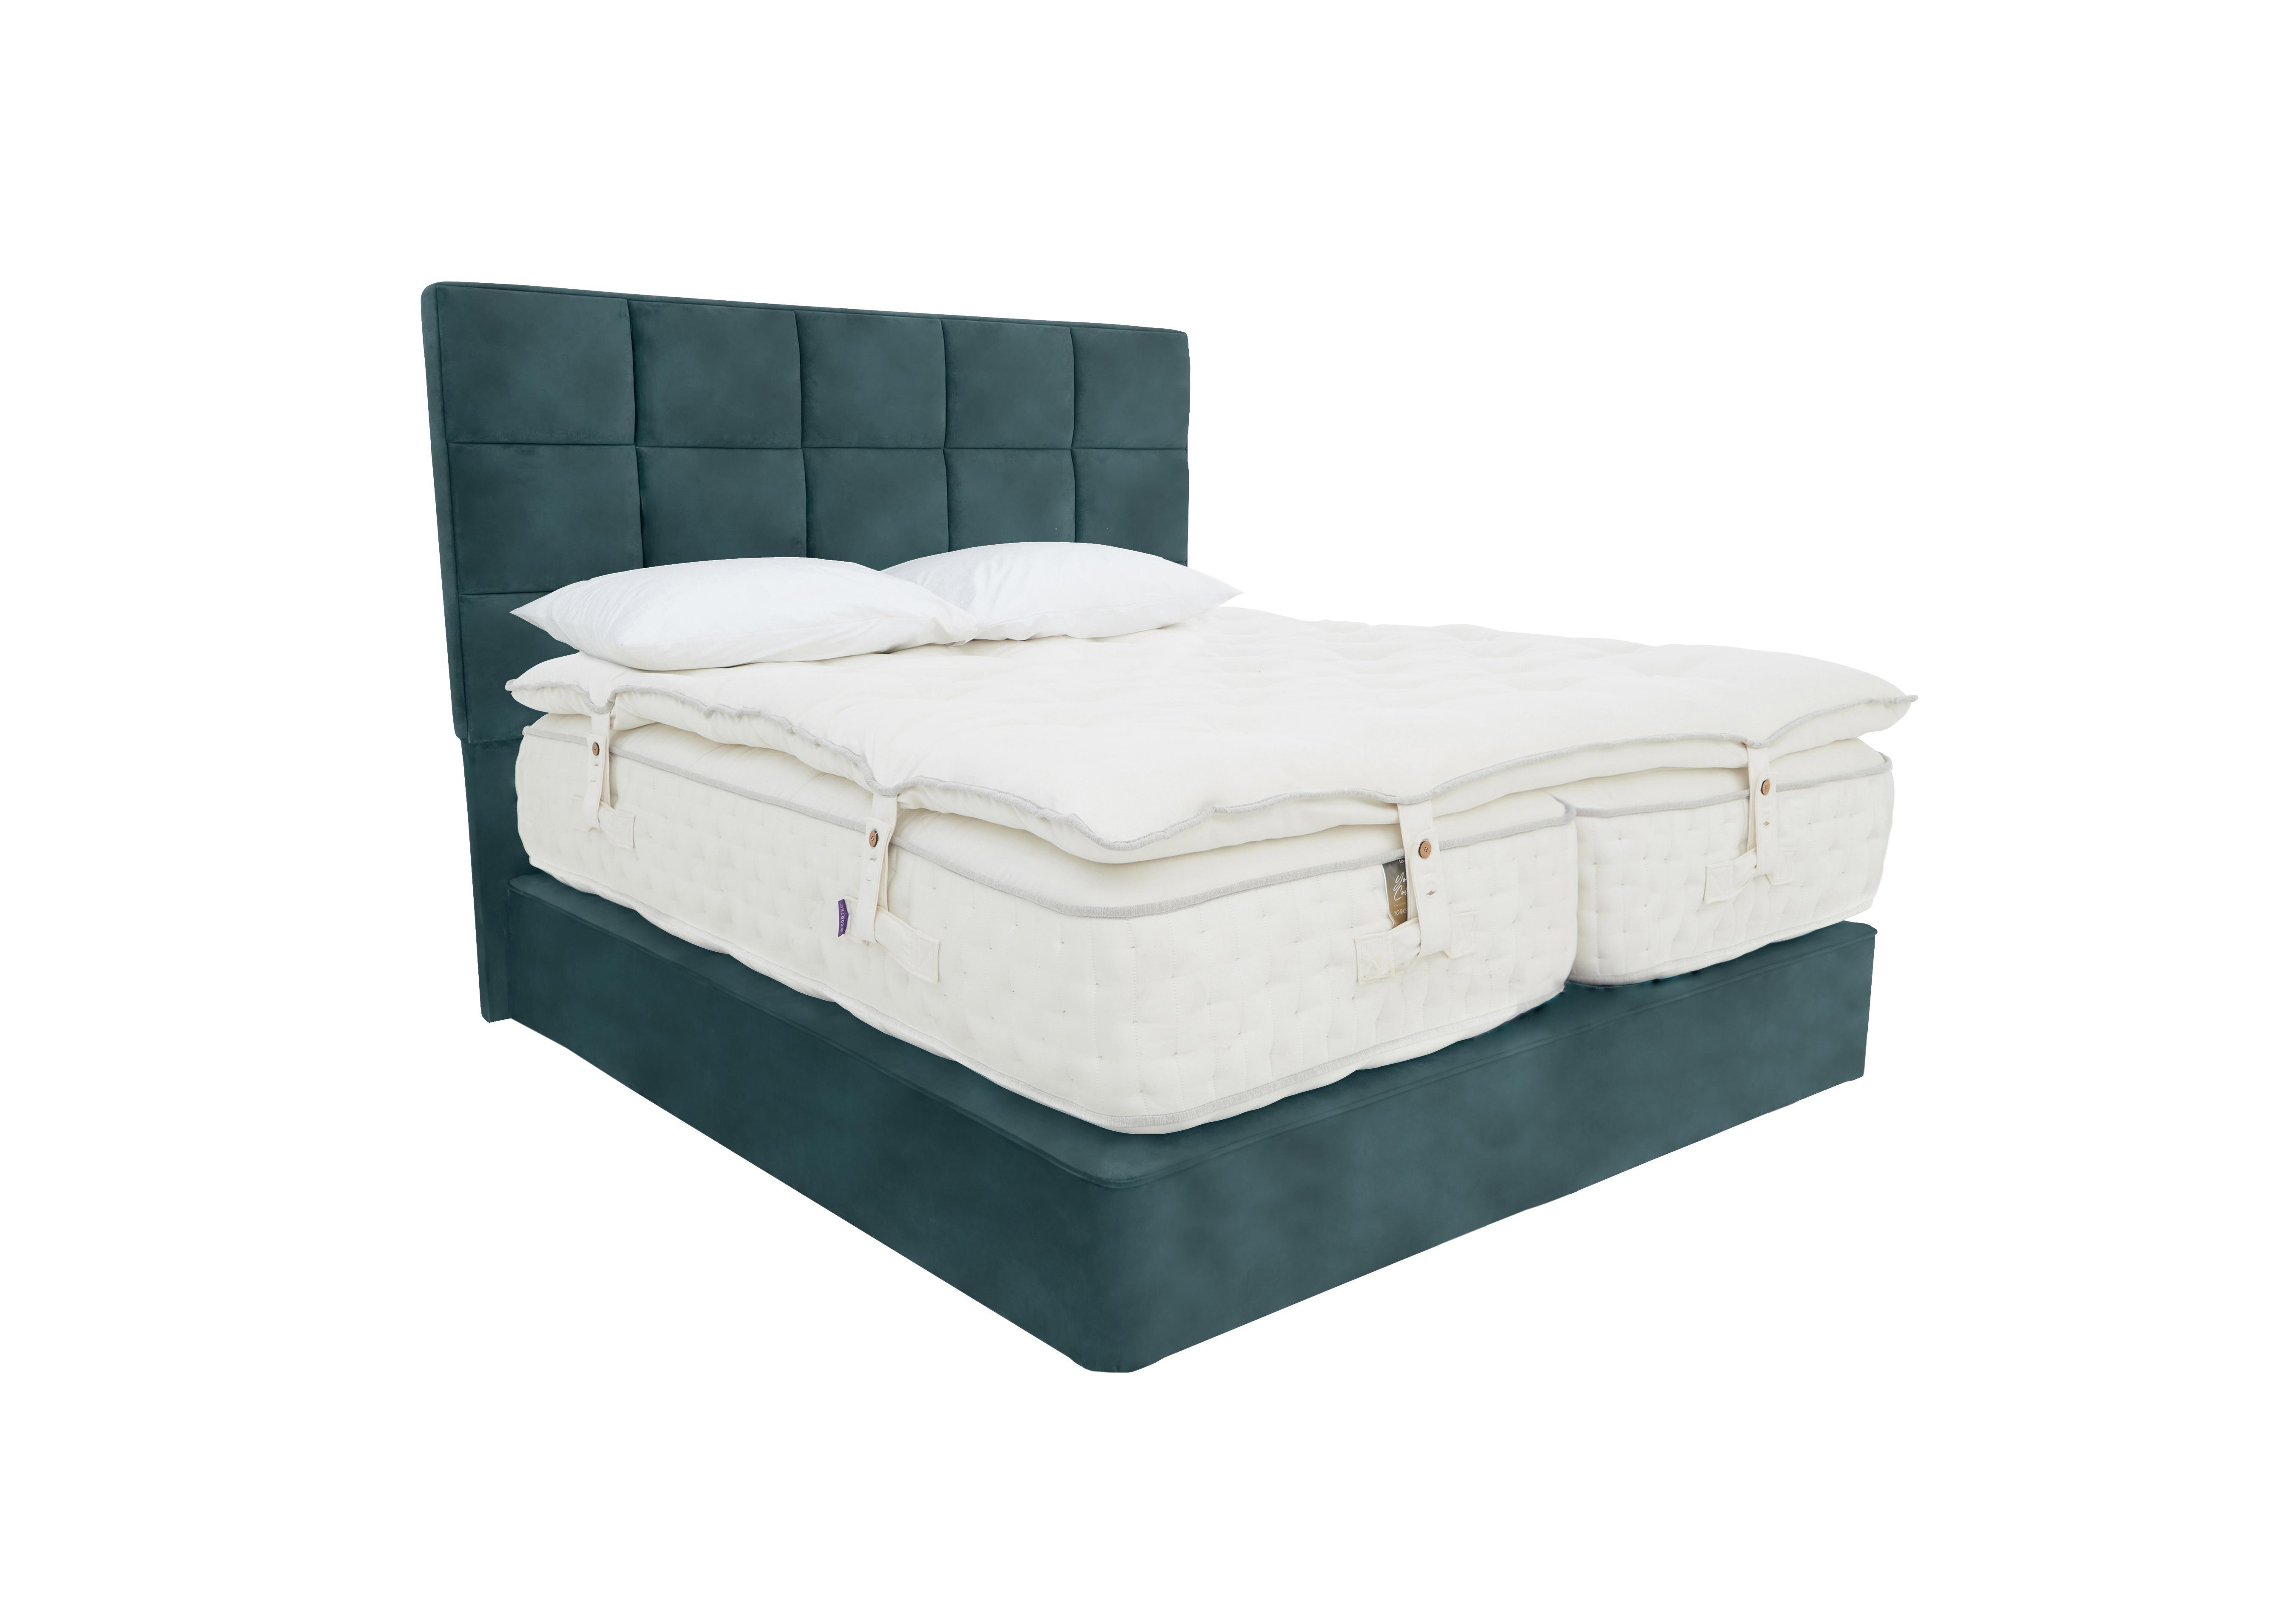 Yorkshire 30K Divan Set with Zip and Link Mattress with Mattress Topper in Lovely Ocean on Furniture Village